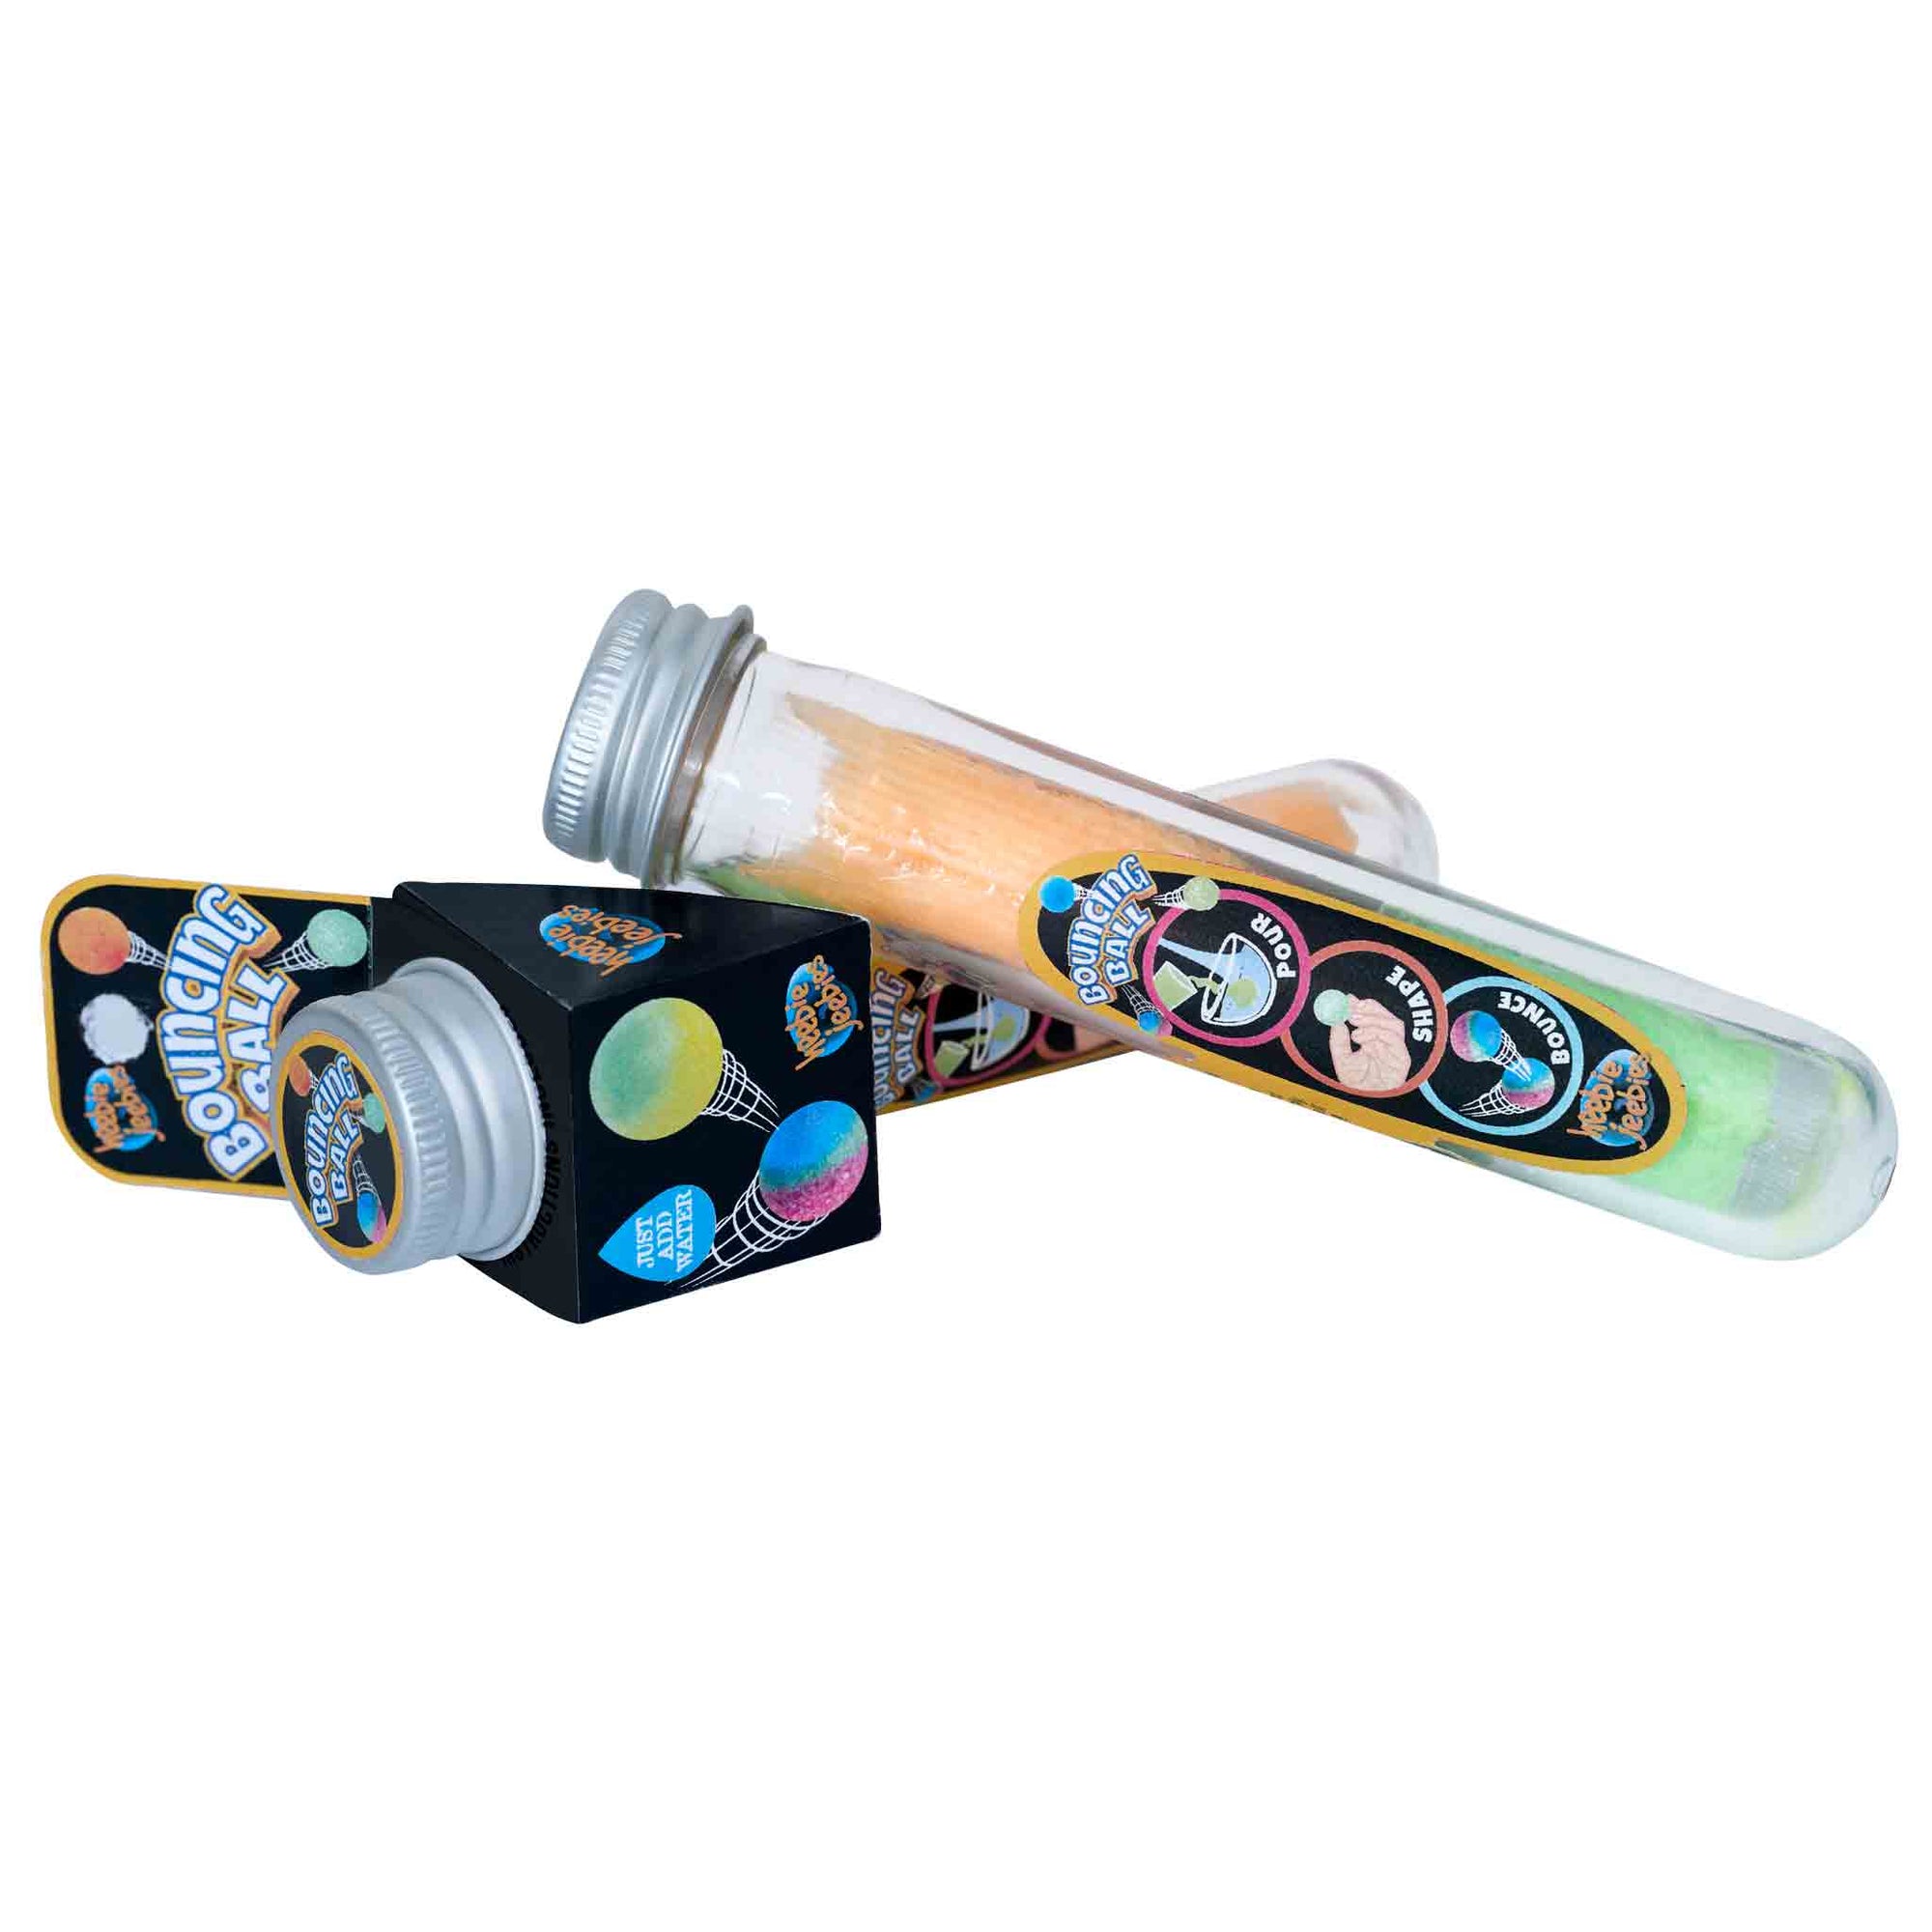 Front view of the Test Tube-Bouncy Ball in its packaging showing all three sides: front, back, and side with information on it.